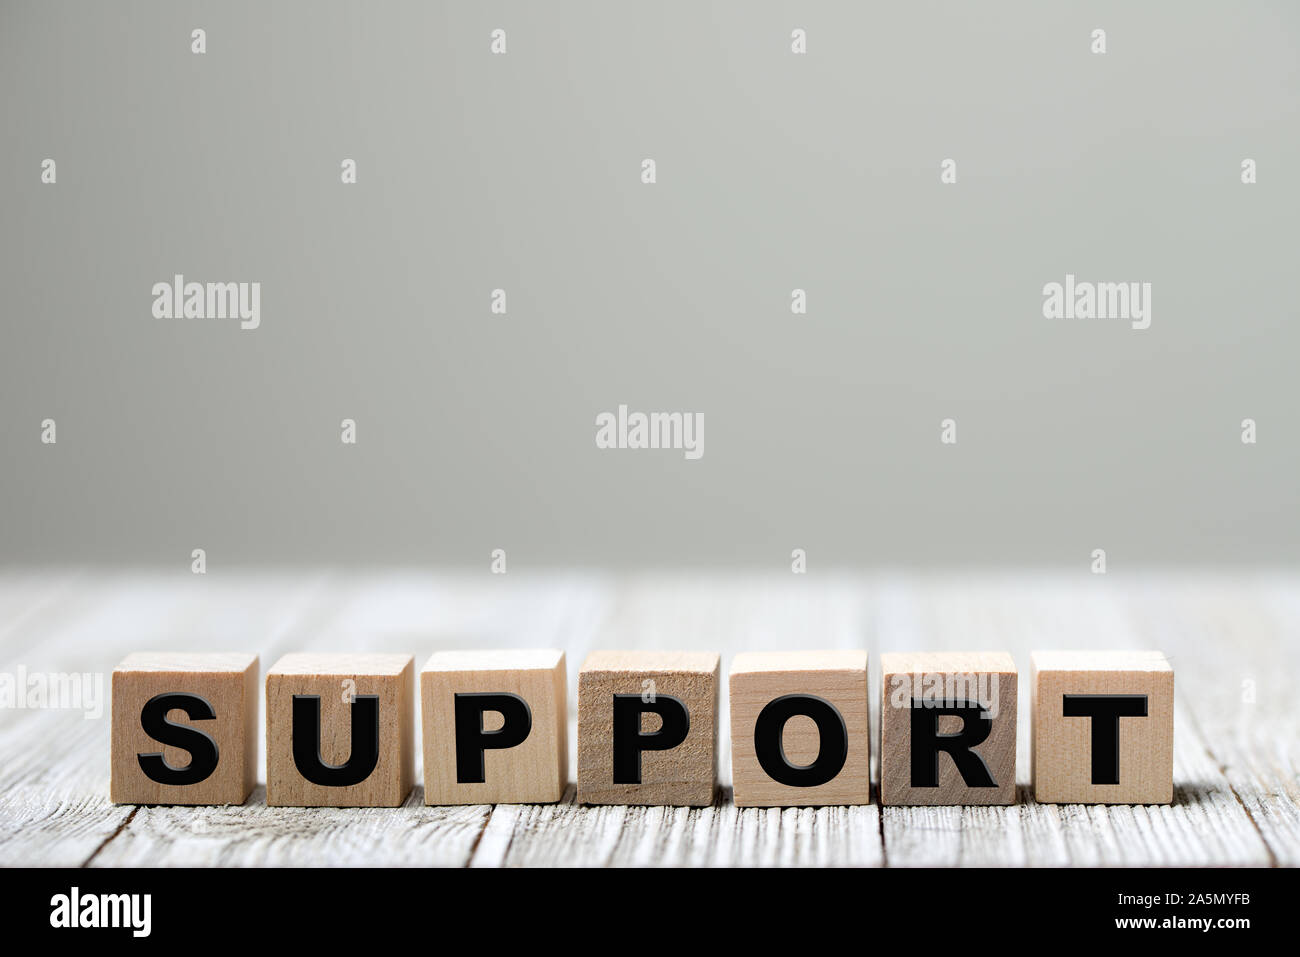 concept of support Stock Photo